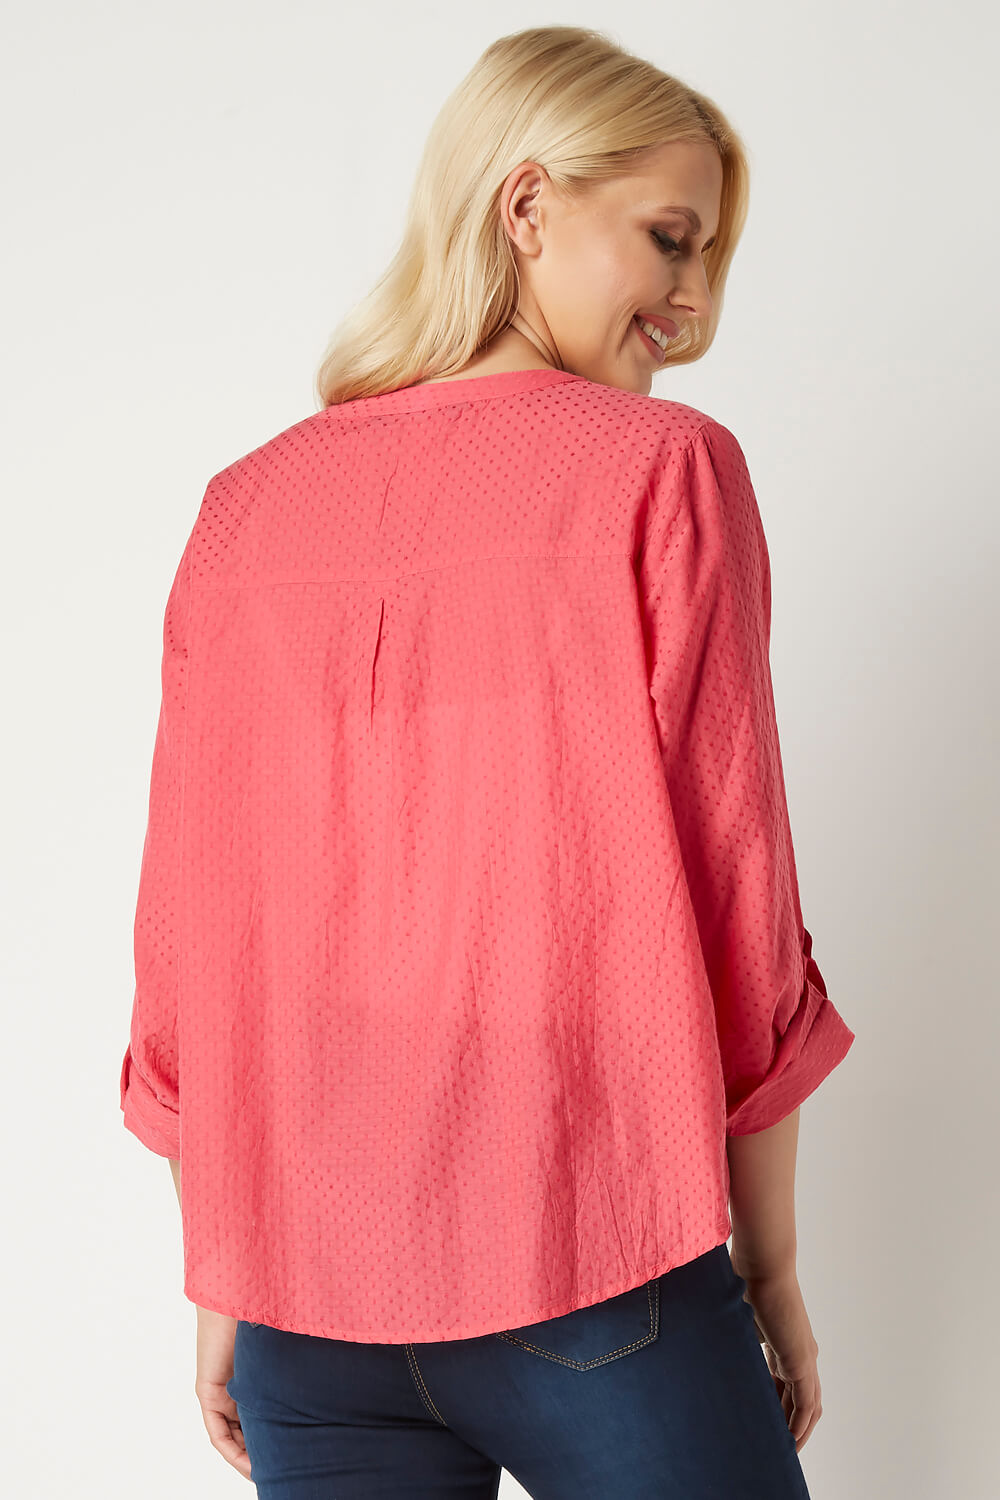 PINK Roll Sleeve Cotton Top, Image 2 of 4